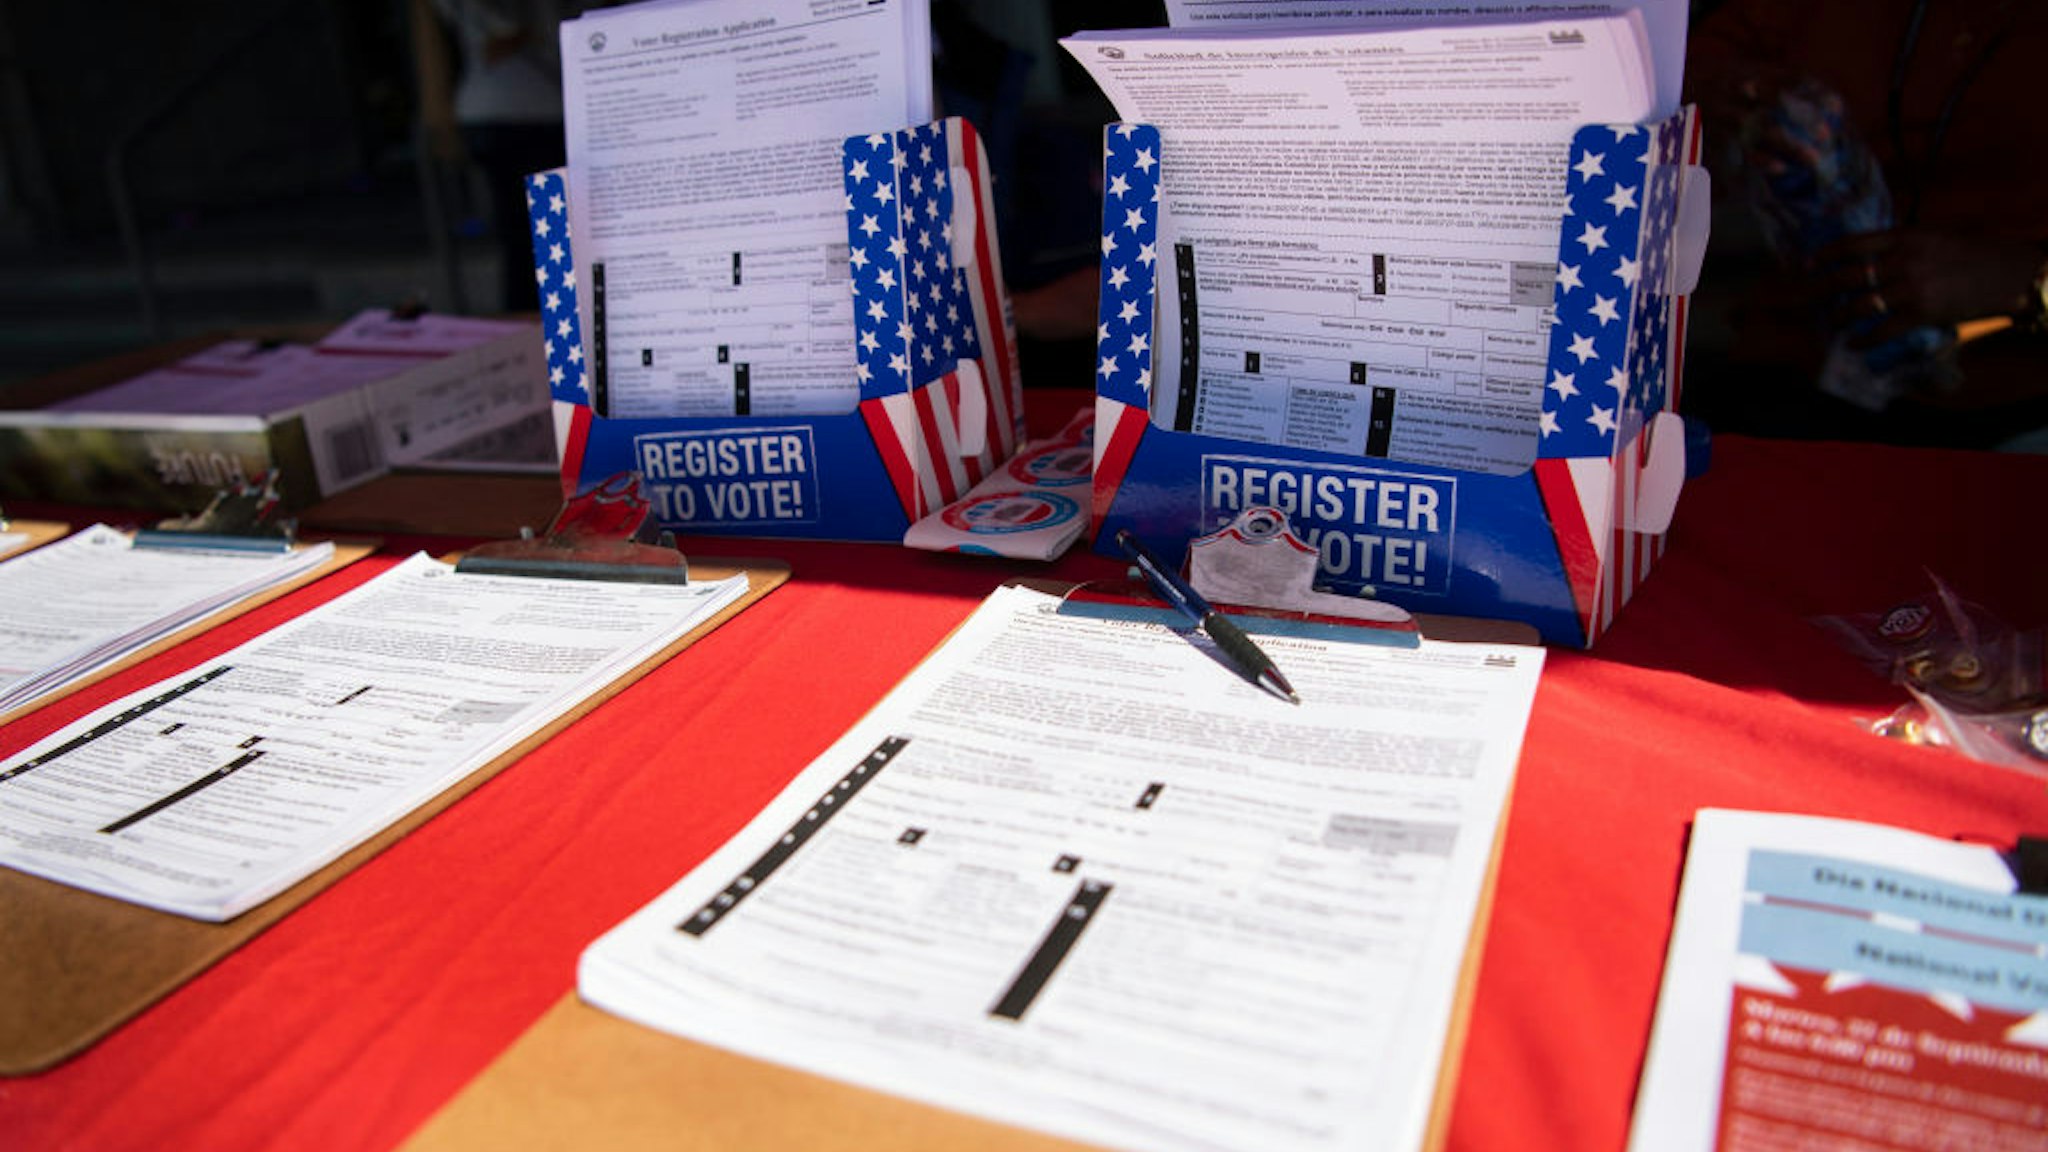 The DC Board of Elections hosts the event Vote Safe DC campaign that encourages residents to utilize voter mail-in ballots for the upcoming elections in response to the coronavirus outbreak, outside of The Anthem in Washington on Monday, Sept. 21, 2020.